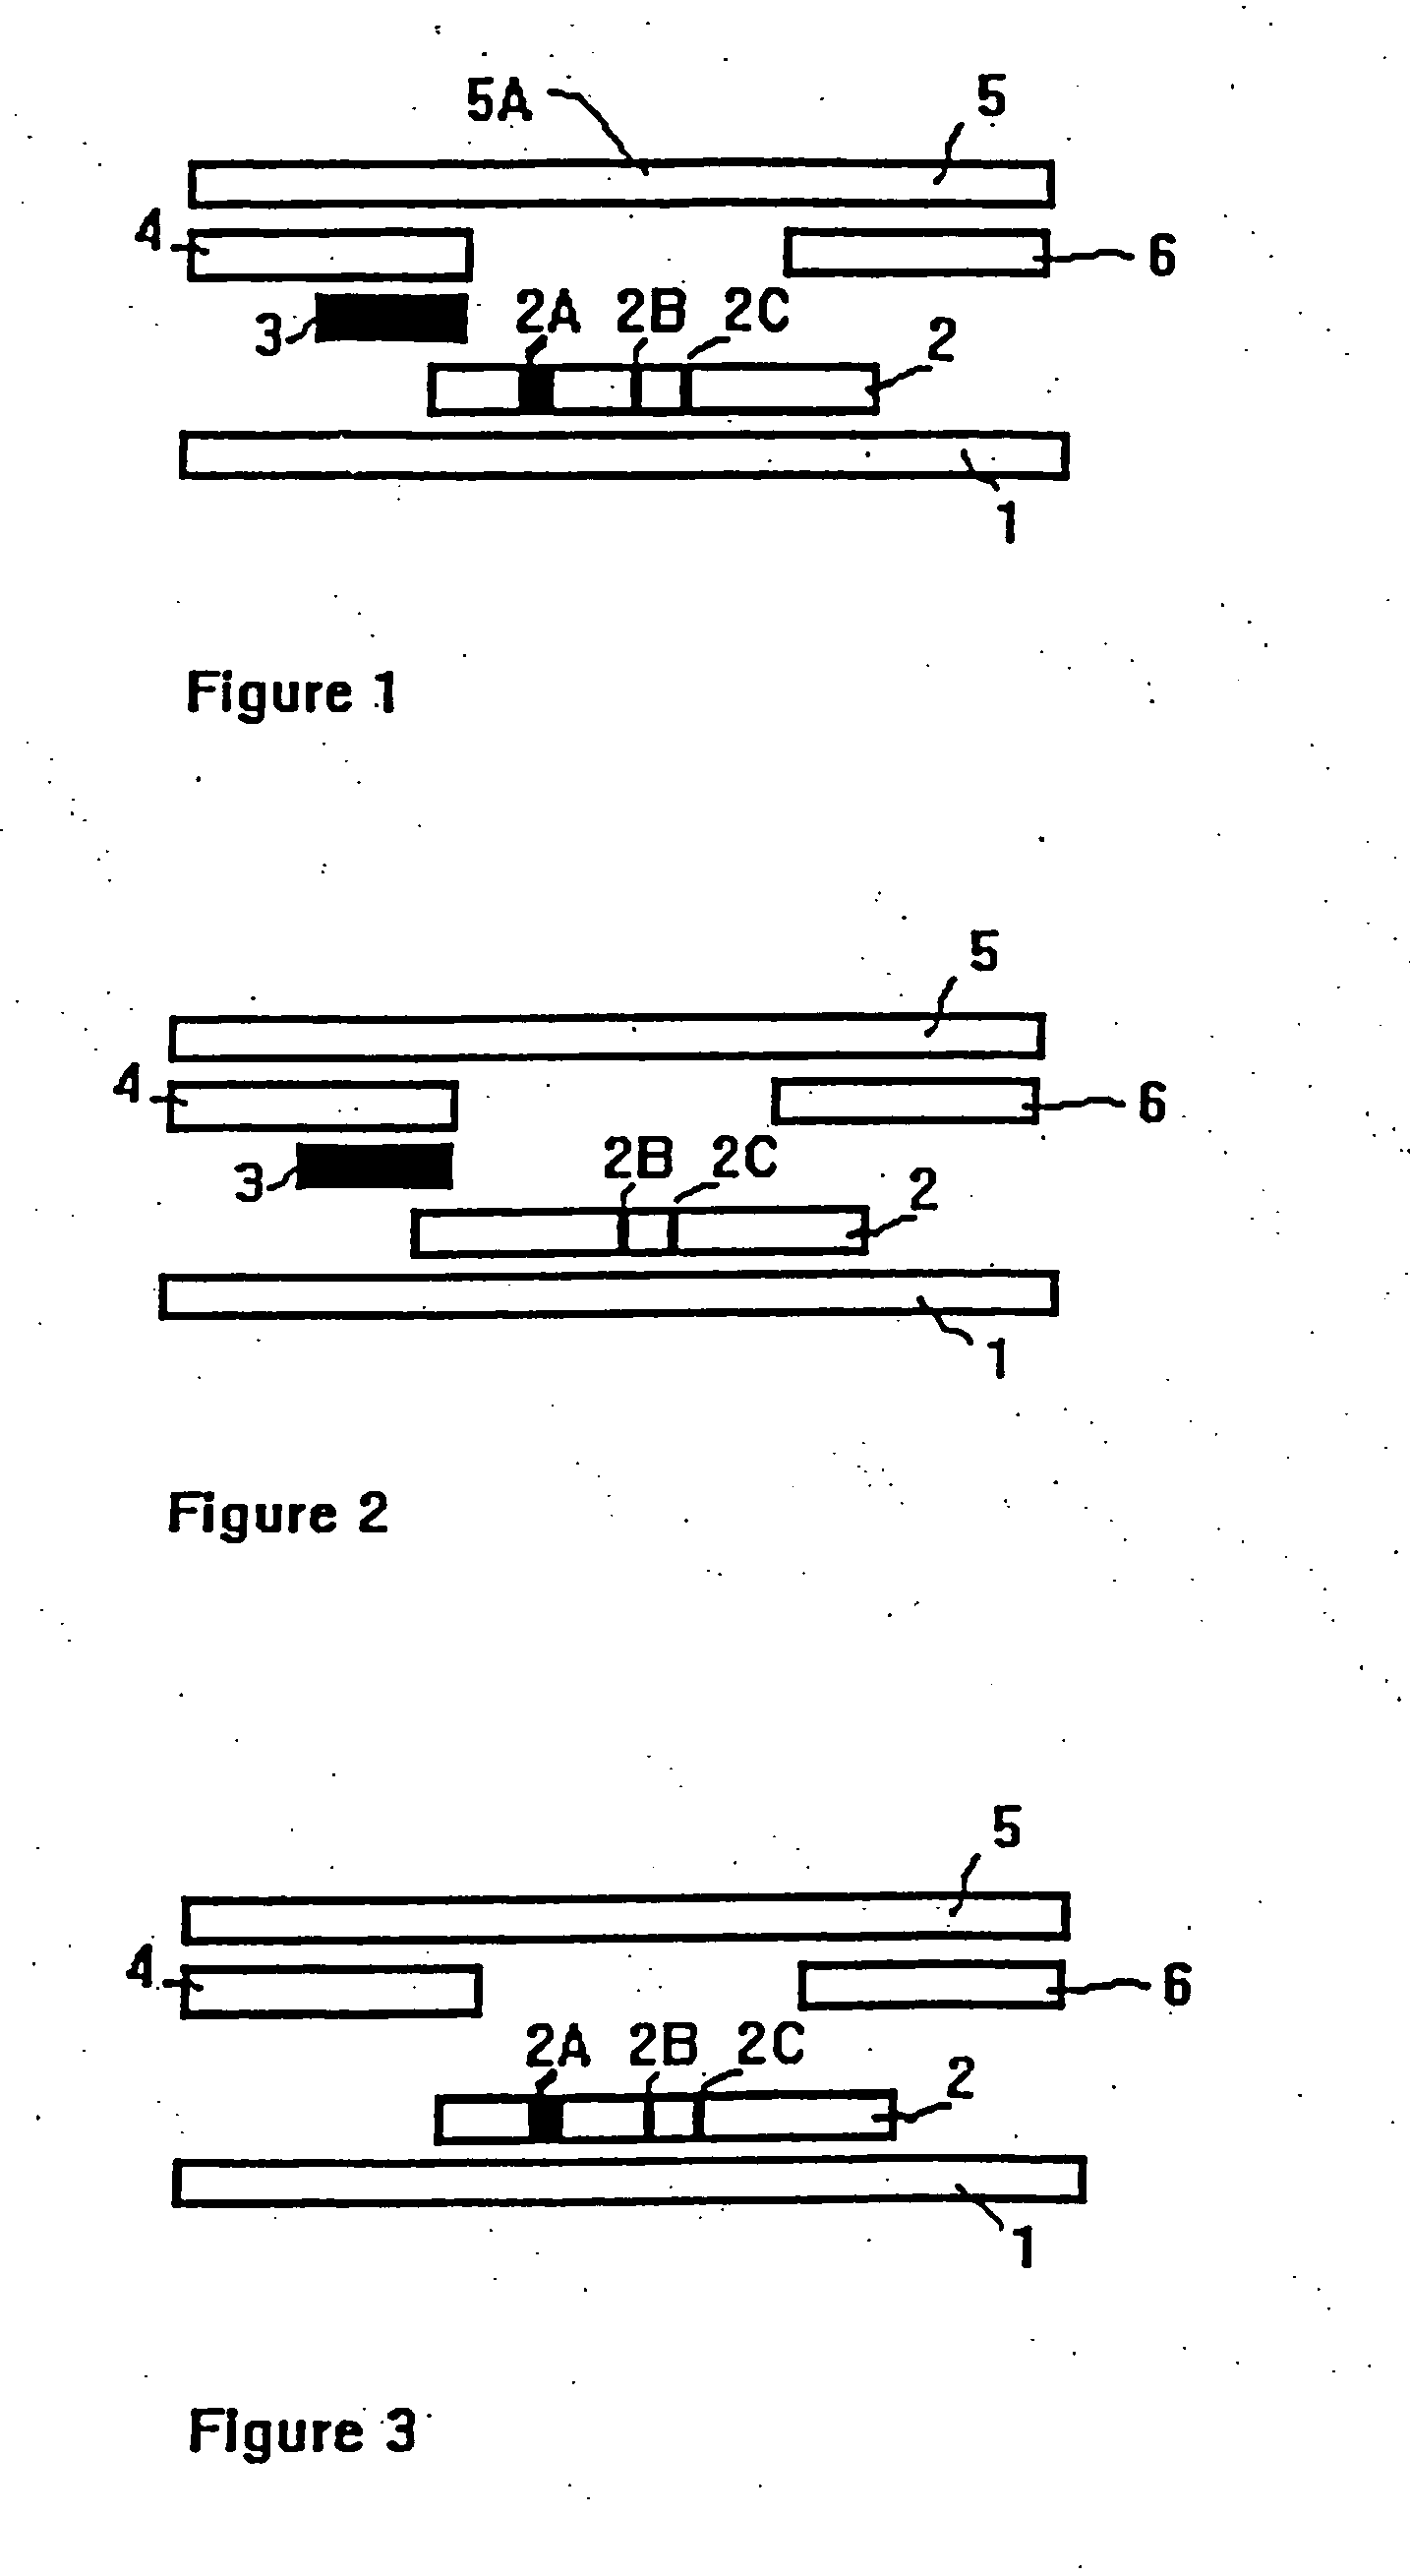 Method of use of one step immunochromatographic device for streptococcus a antigen